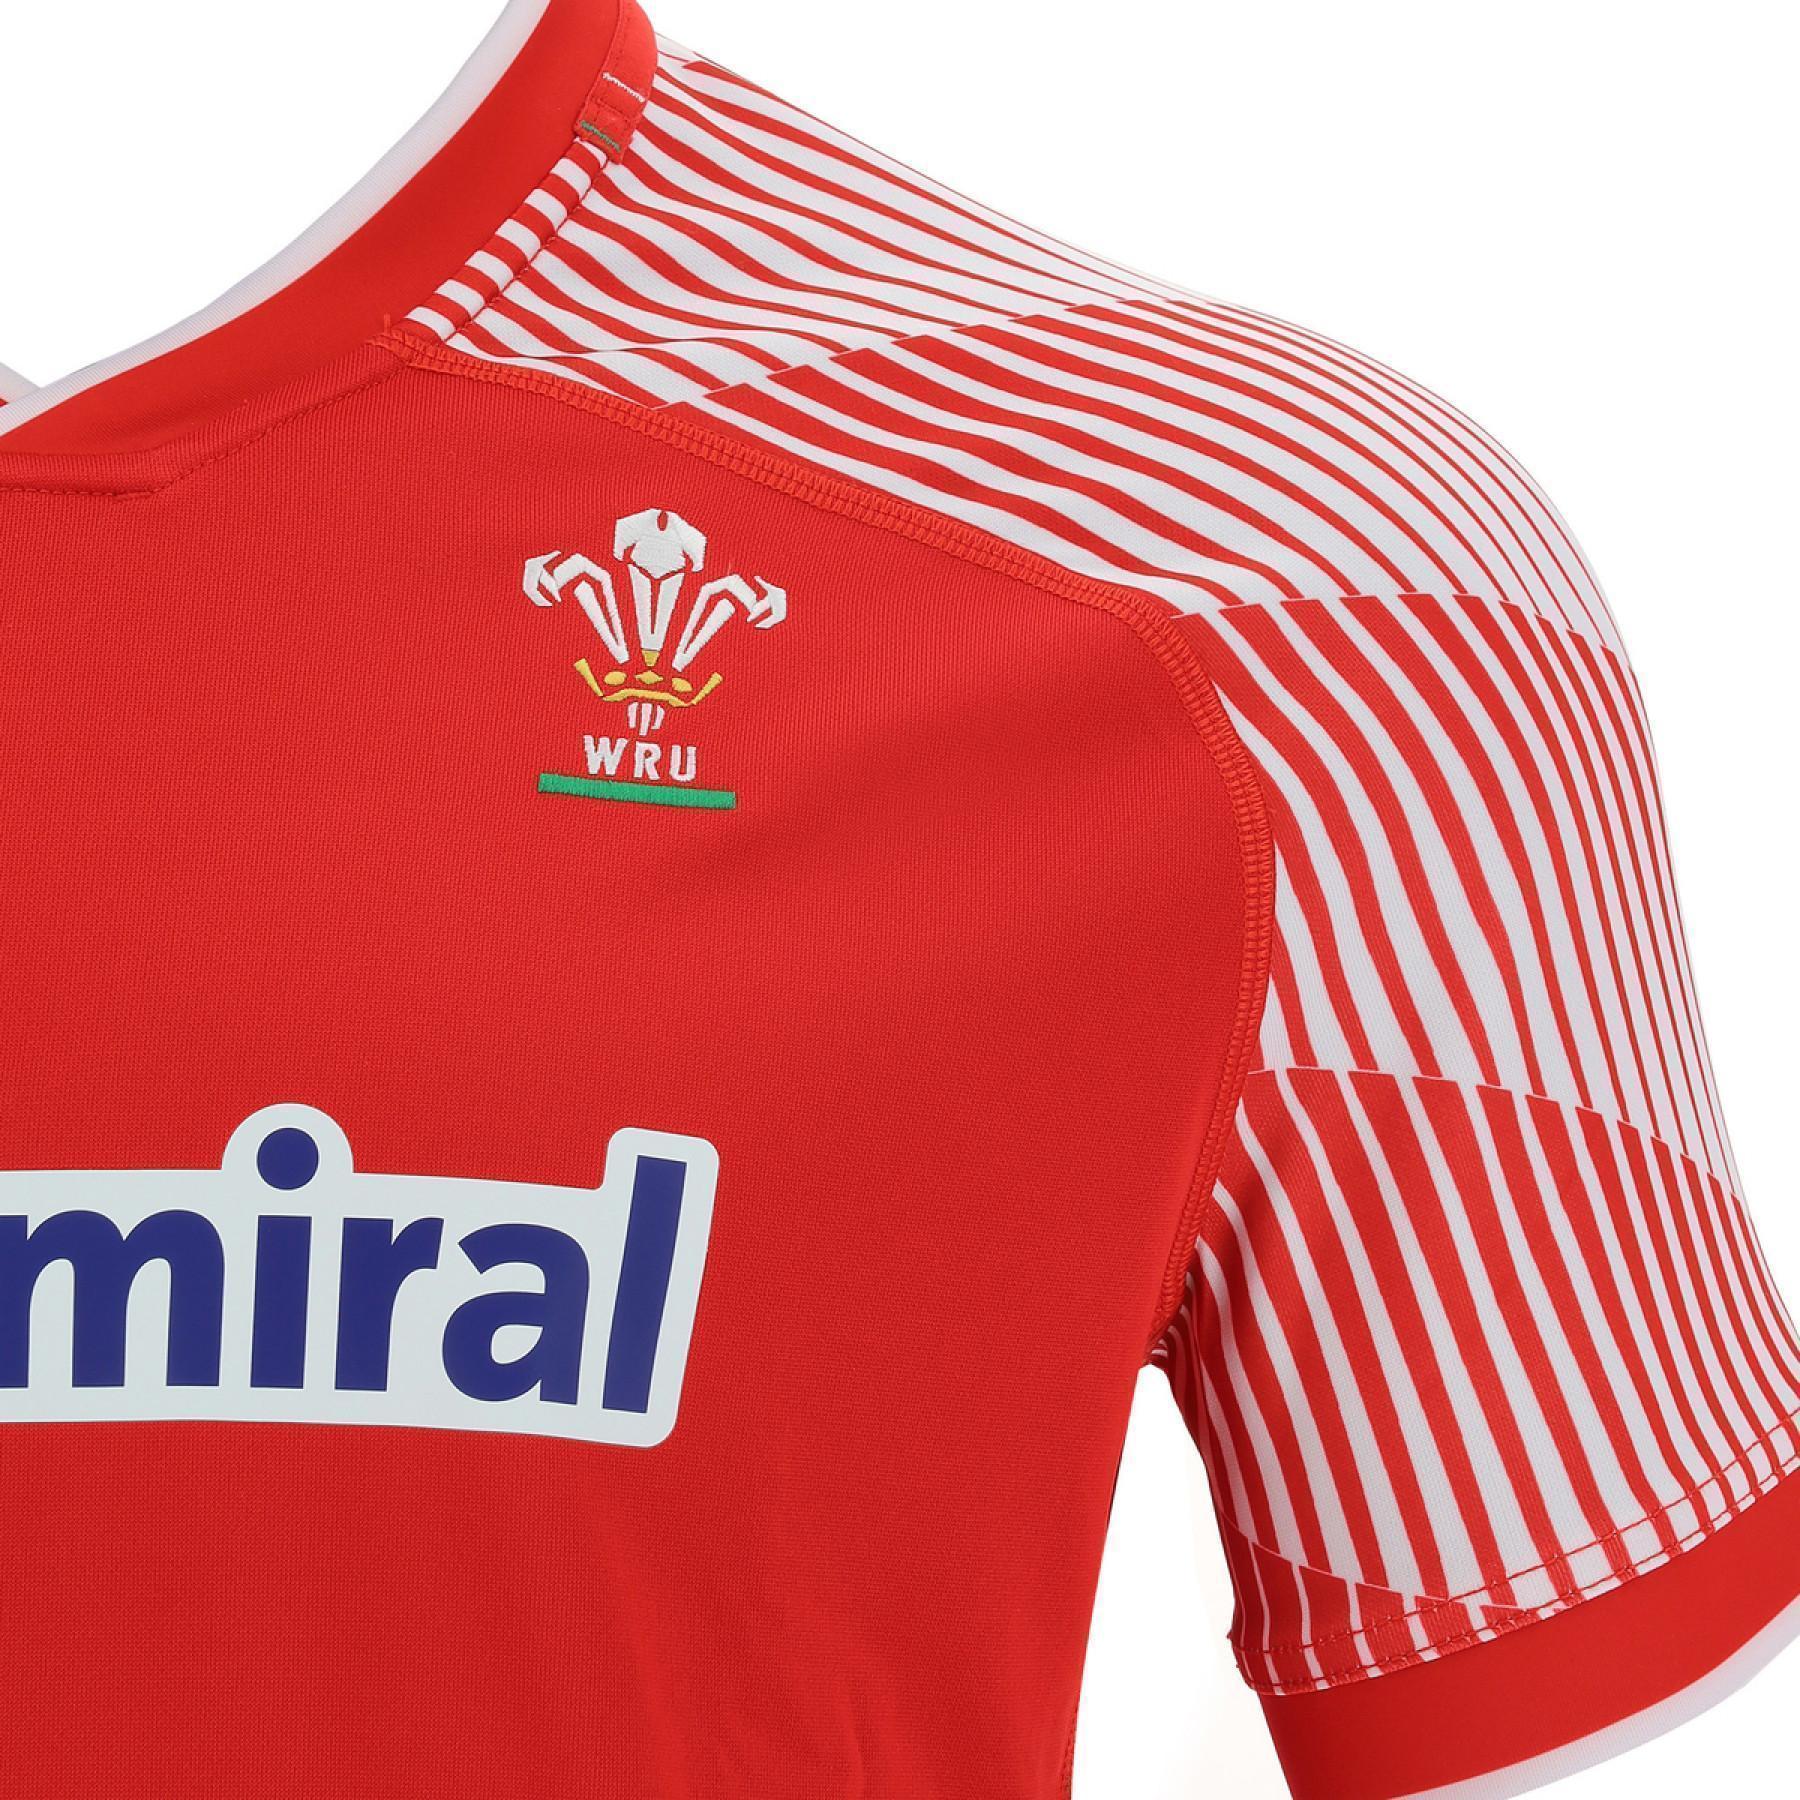 Home jersey seven Pays de Galles rugby 2020/21